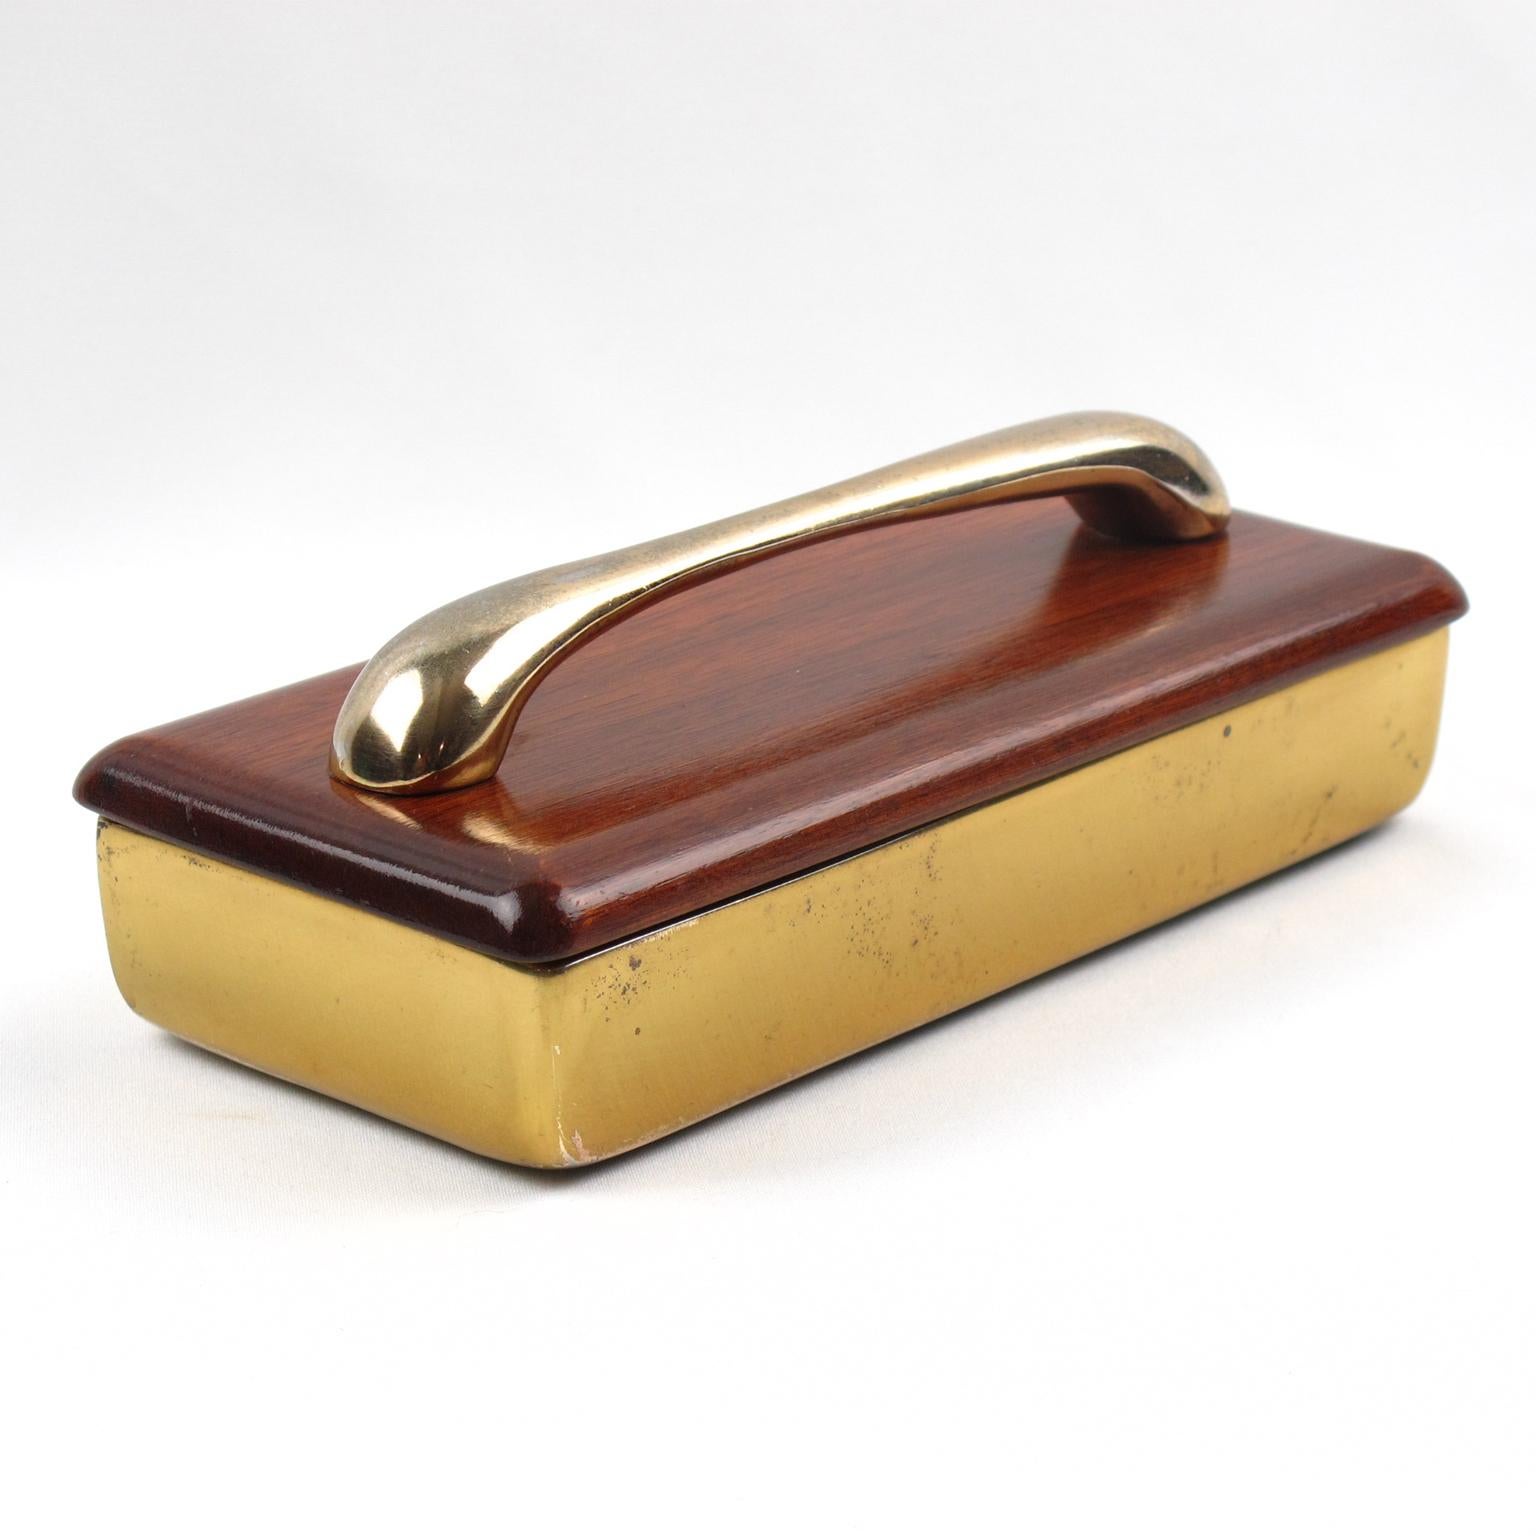 Beautiful Mid-Century Modern brass and rosewood decorative lidded box by Ben Seibel for Jenfredware. Heavy gilded brass rectangular box, partitioned with the original cork lined interior. Thick rosewood lid with heavy gilded brass handle. Fully